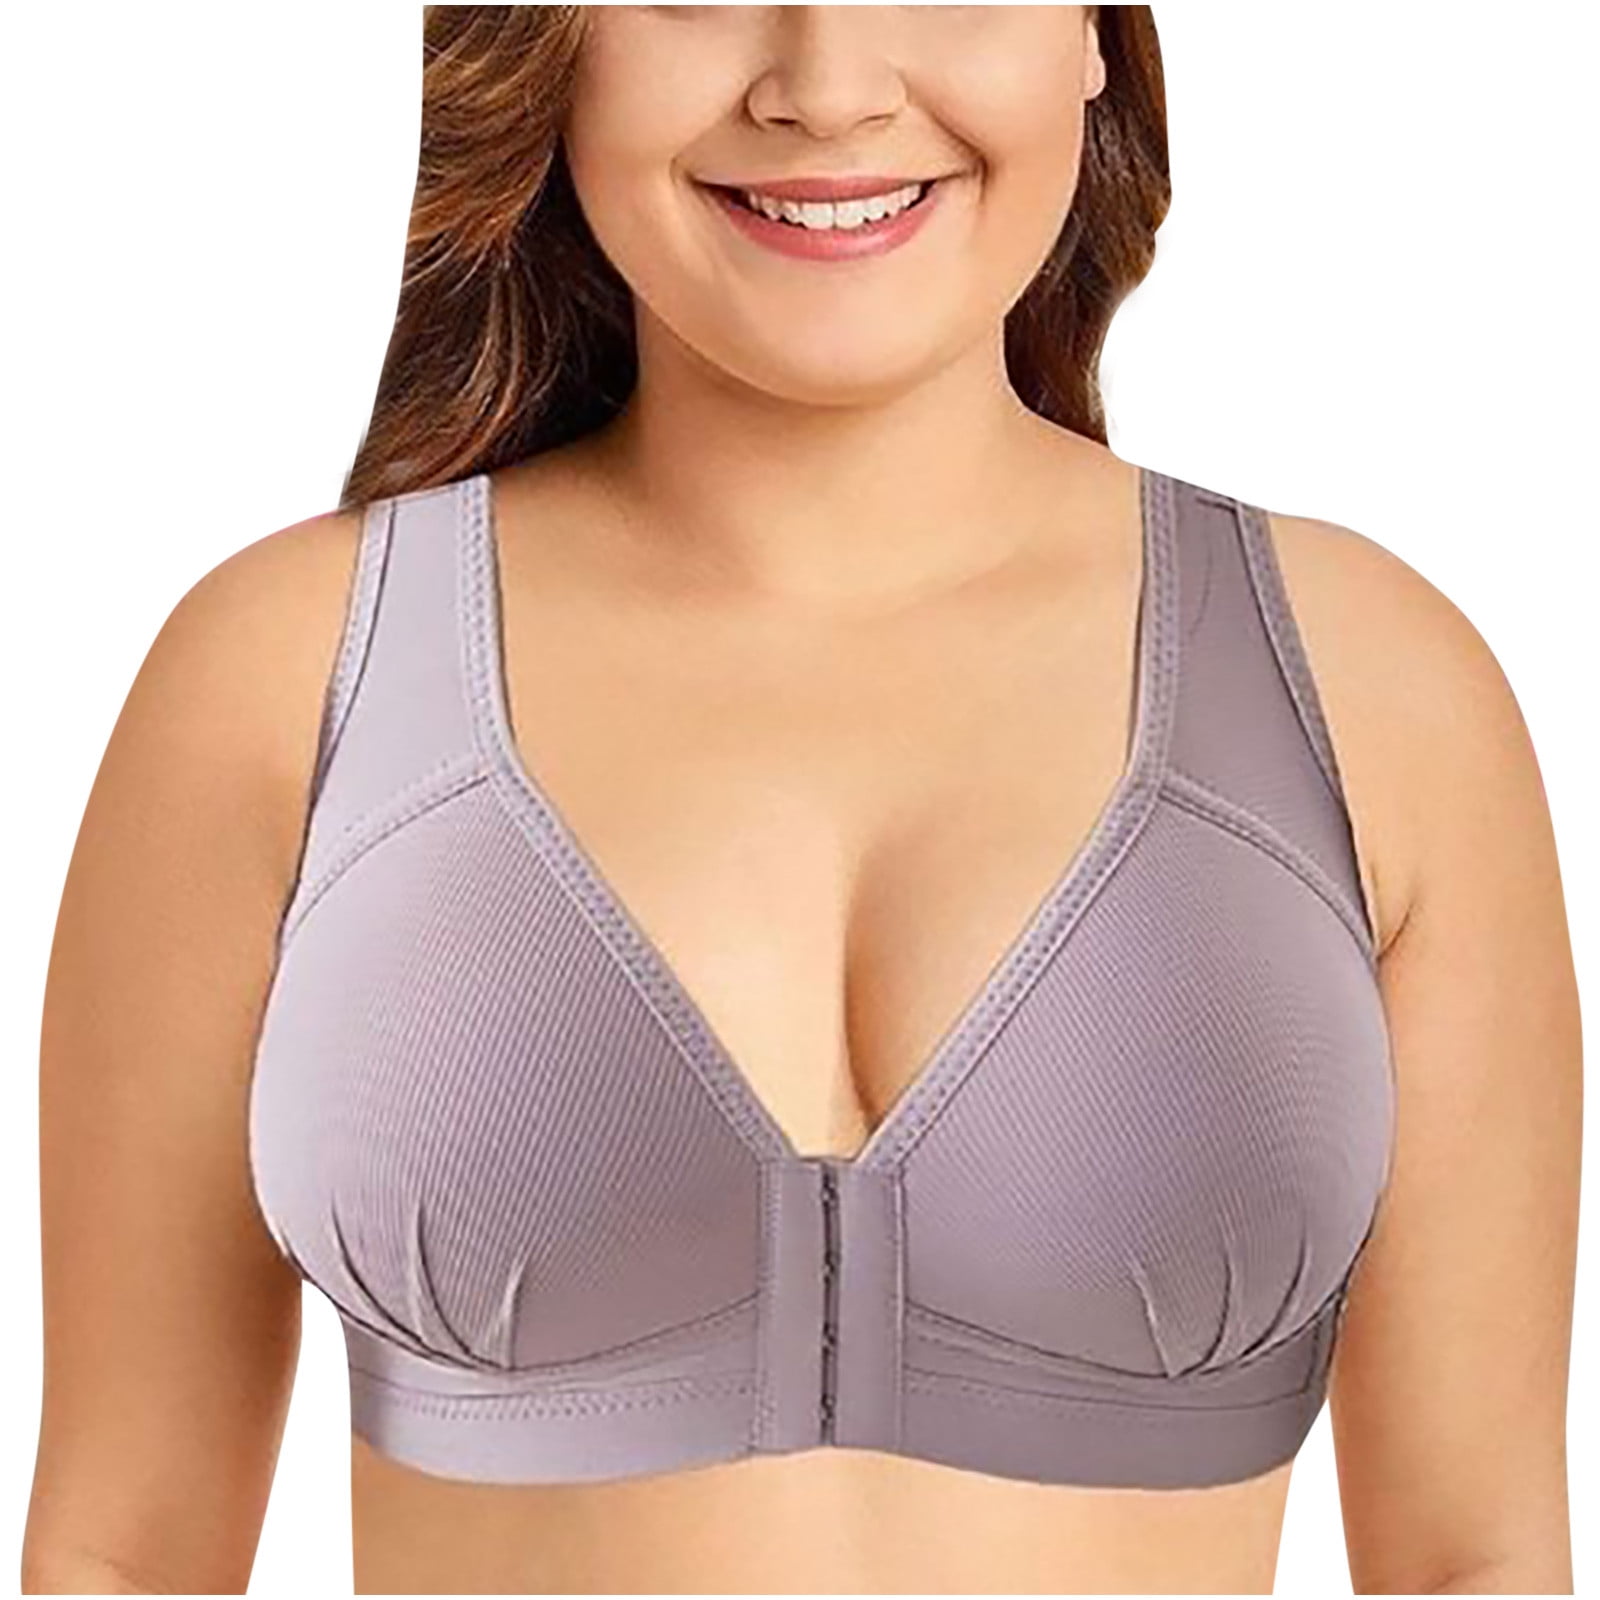 TQWQT Women's Plus Size Bras Corset Top Bustier Padded Underwire Bra Add  One Cup,Gray XL 